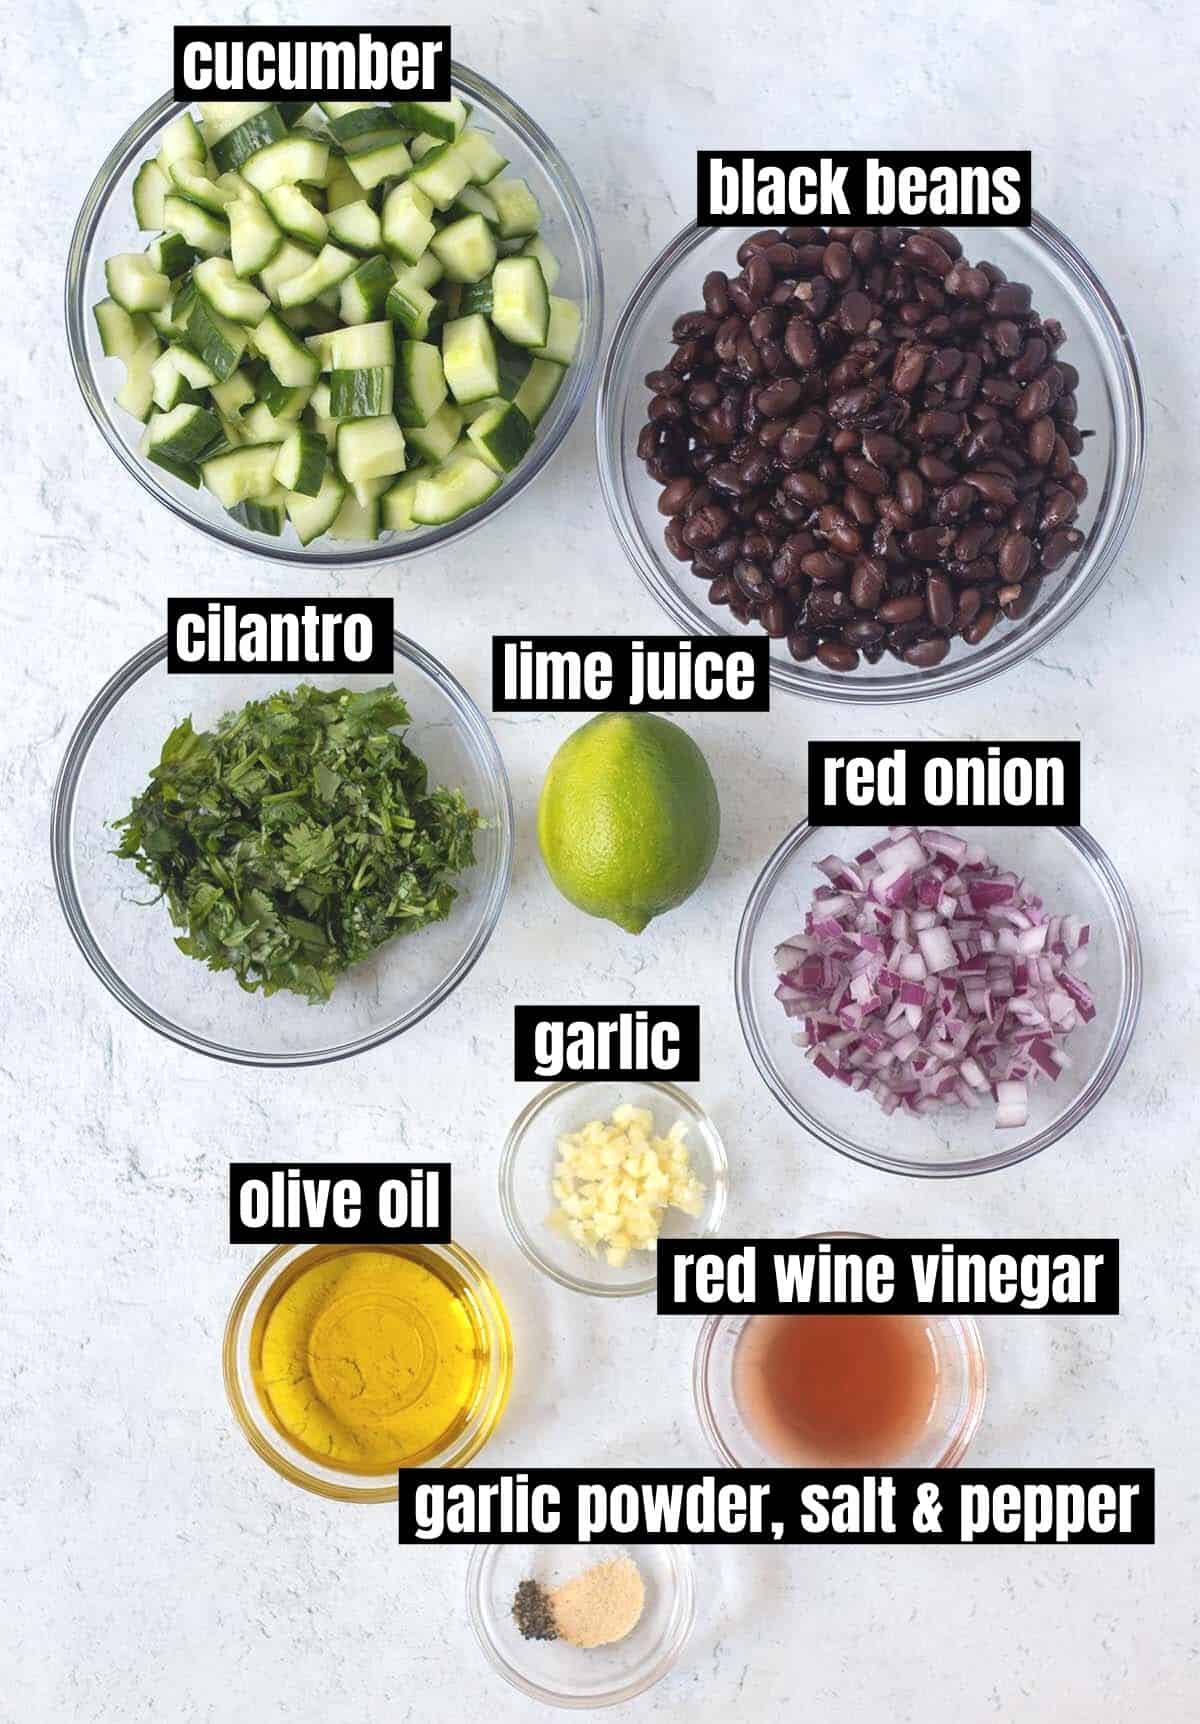 ingredients for cucumber black bean salad which include diced cucumbers, black beans, cilantro, lime, red onion, garlic, olive oil, red wine vinegar & seasonings.